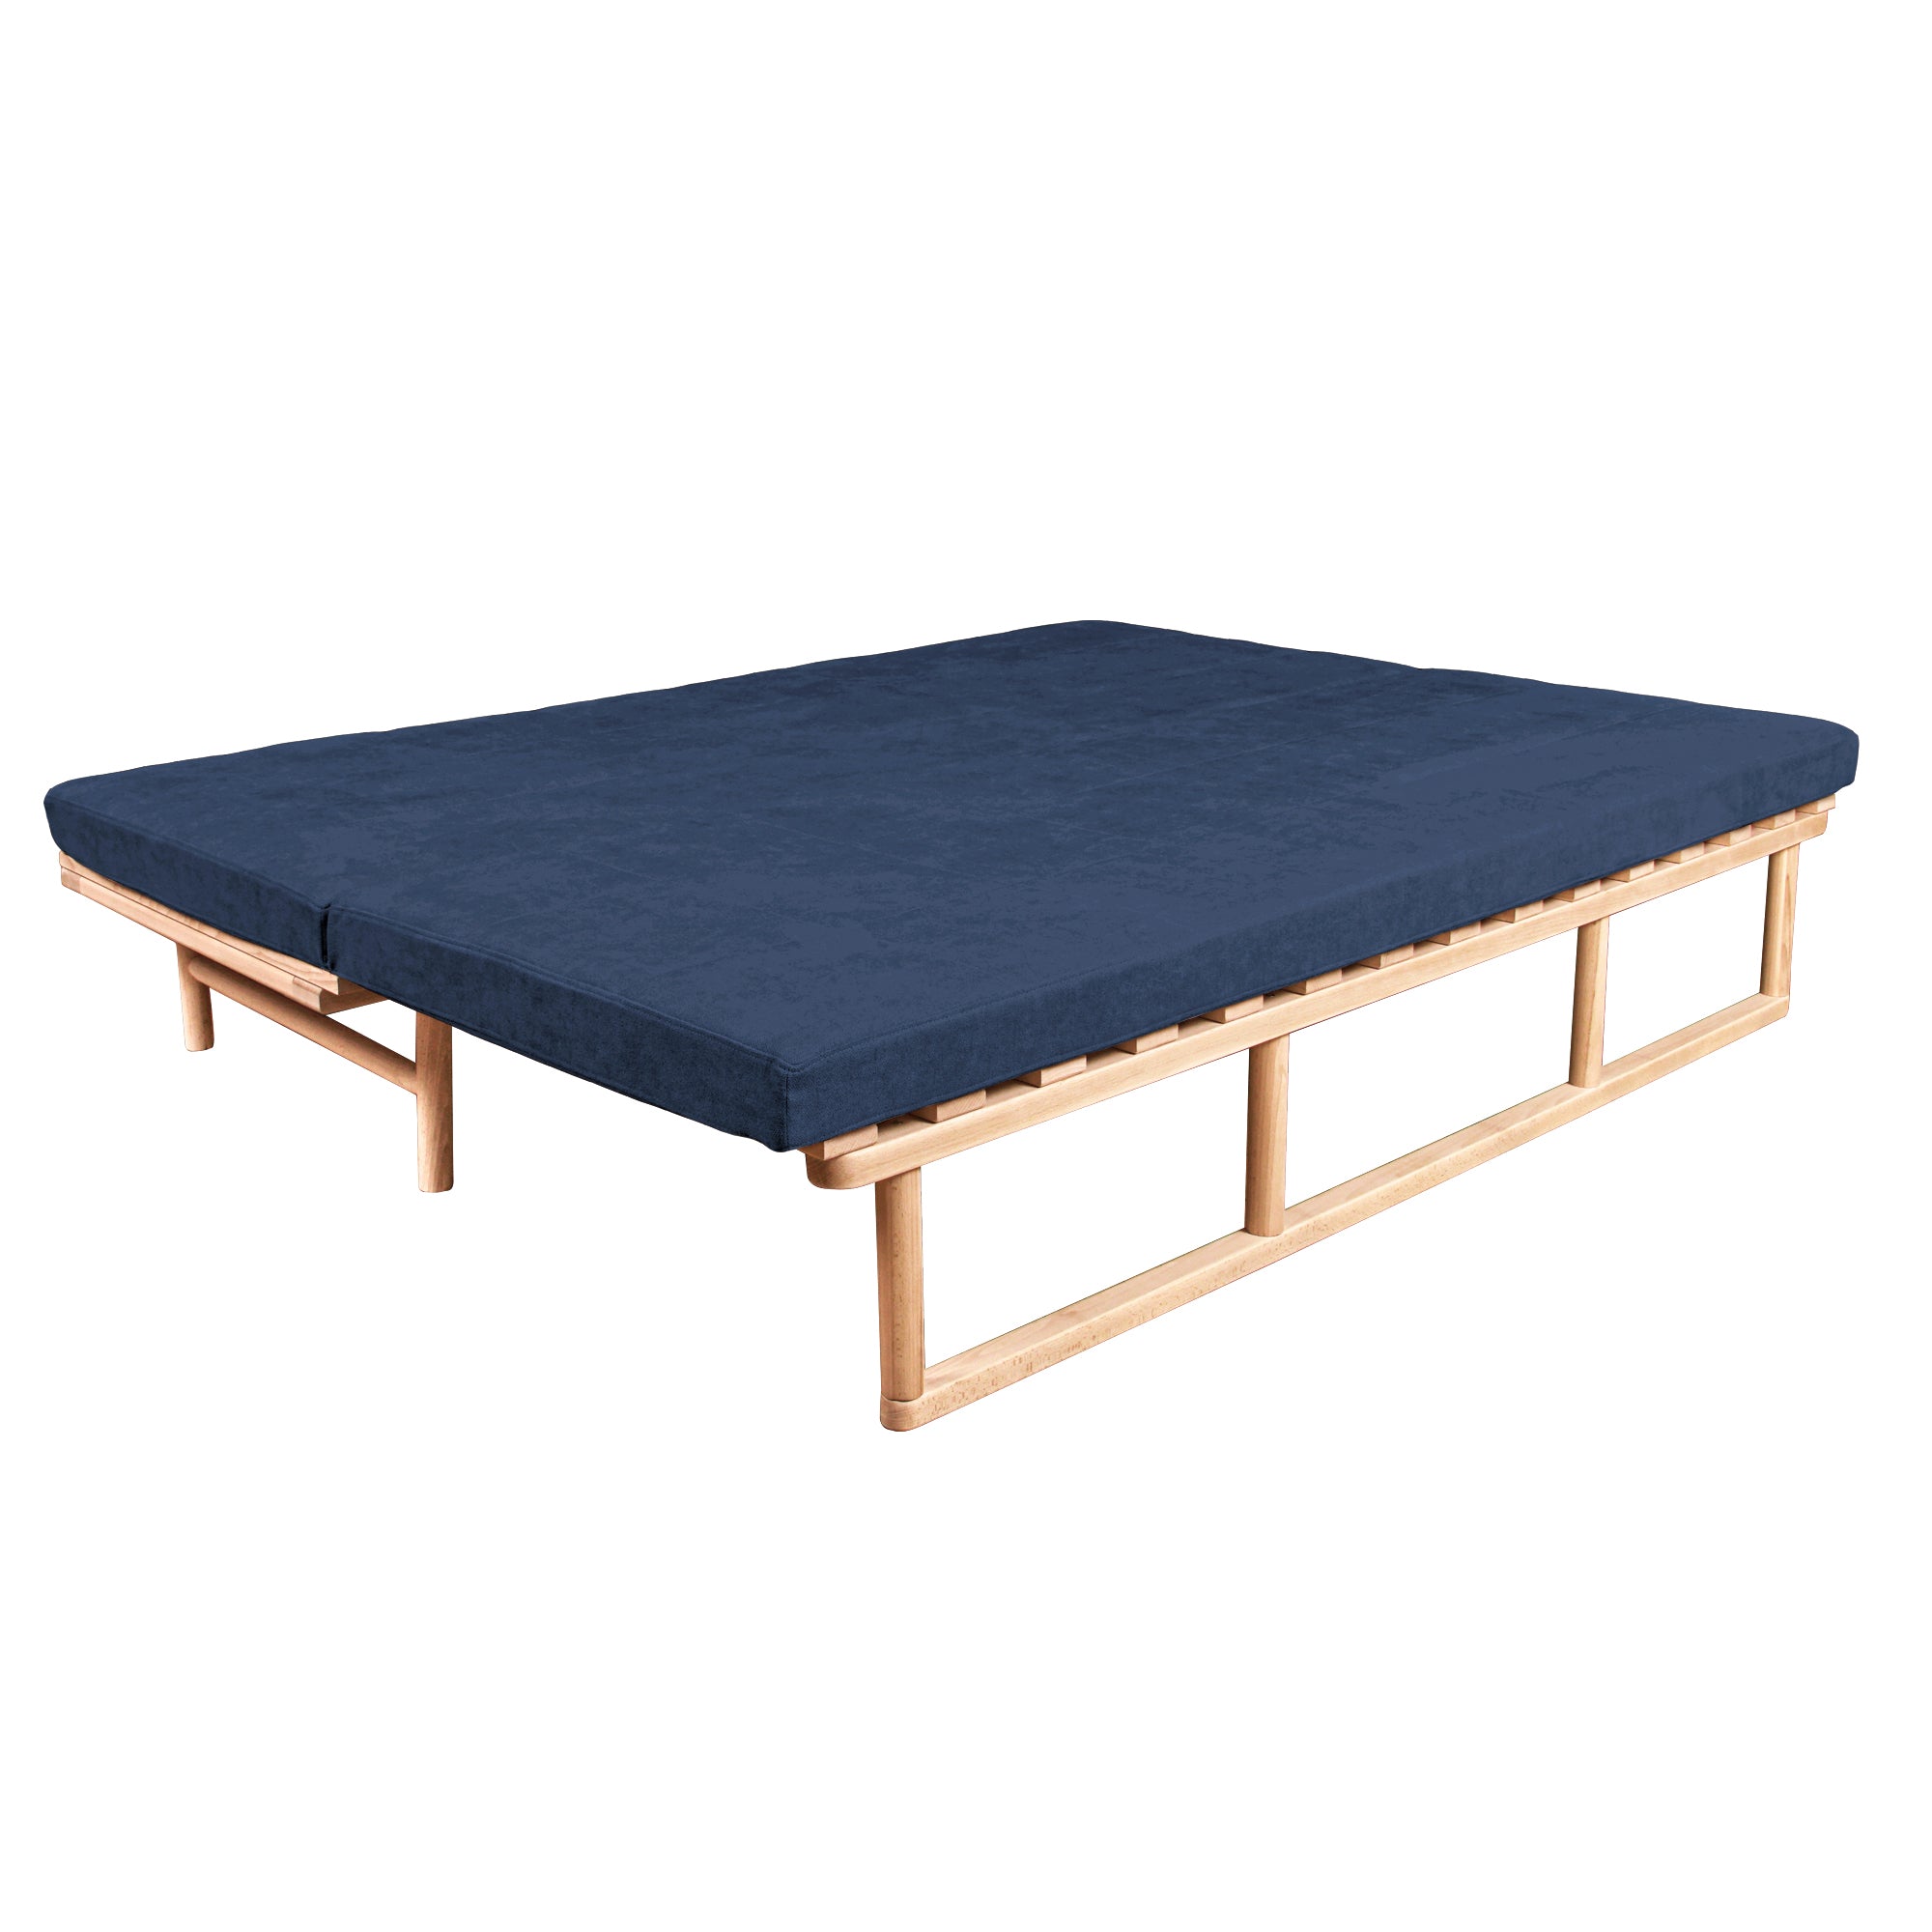 Le MAR Folding Daybed, Beech Wood Frame, Natural Colour-upholstery blue-folded view